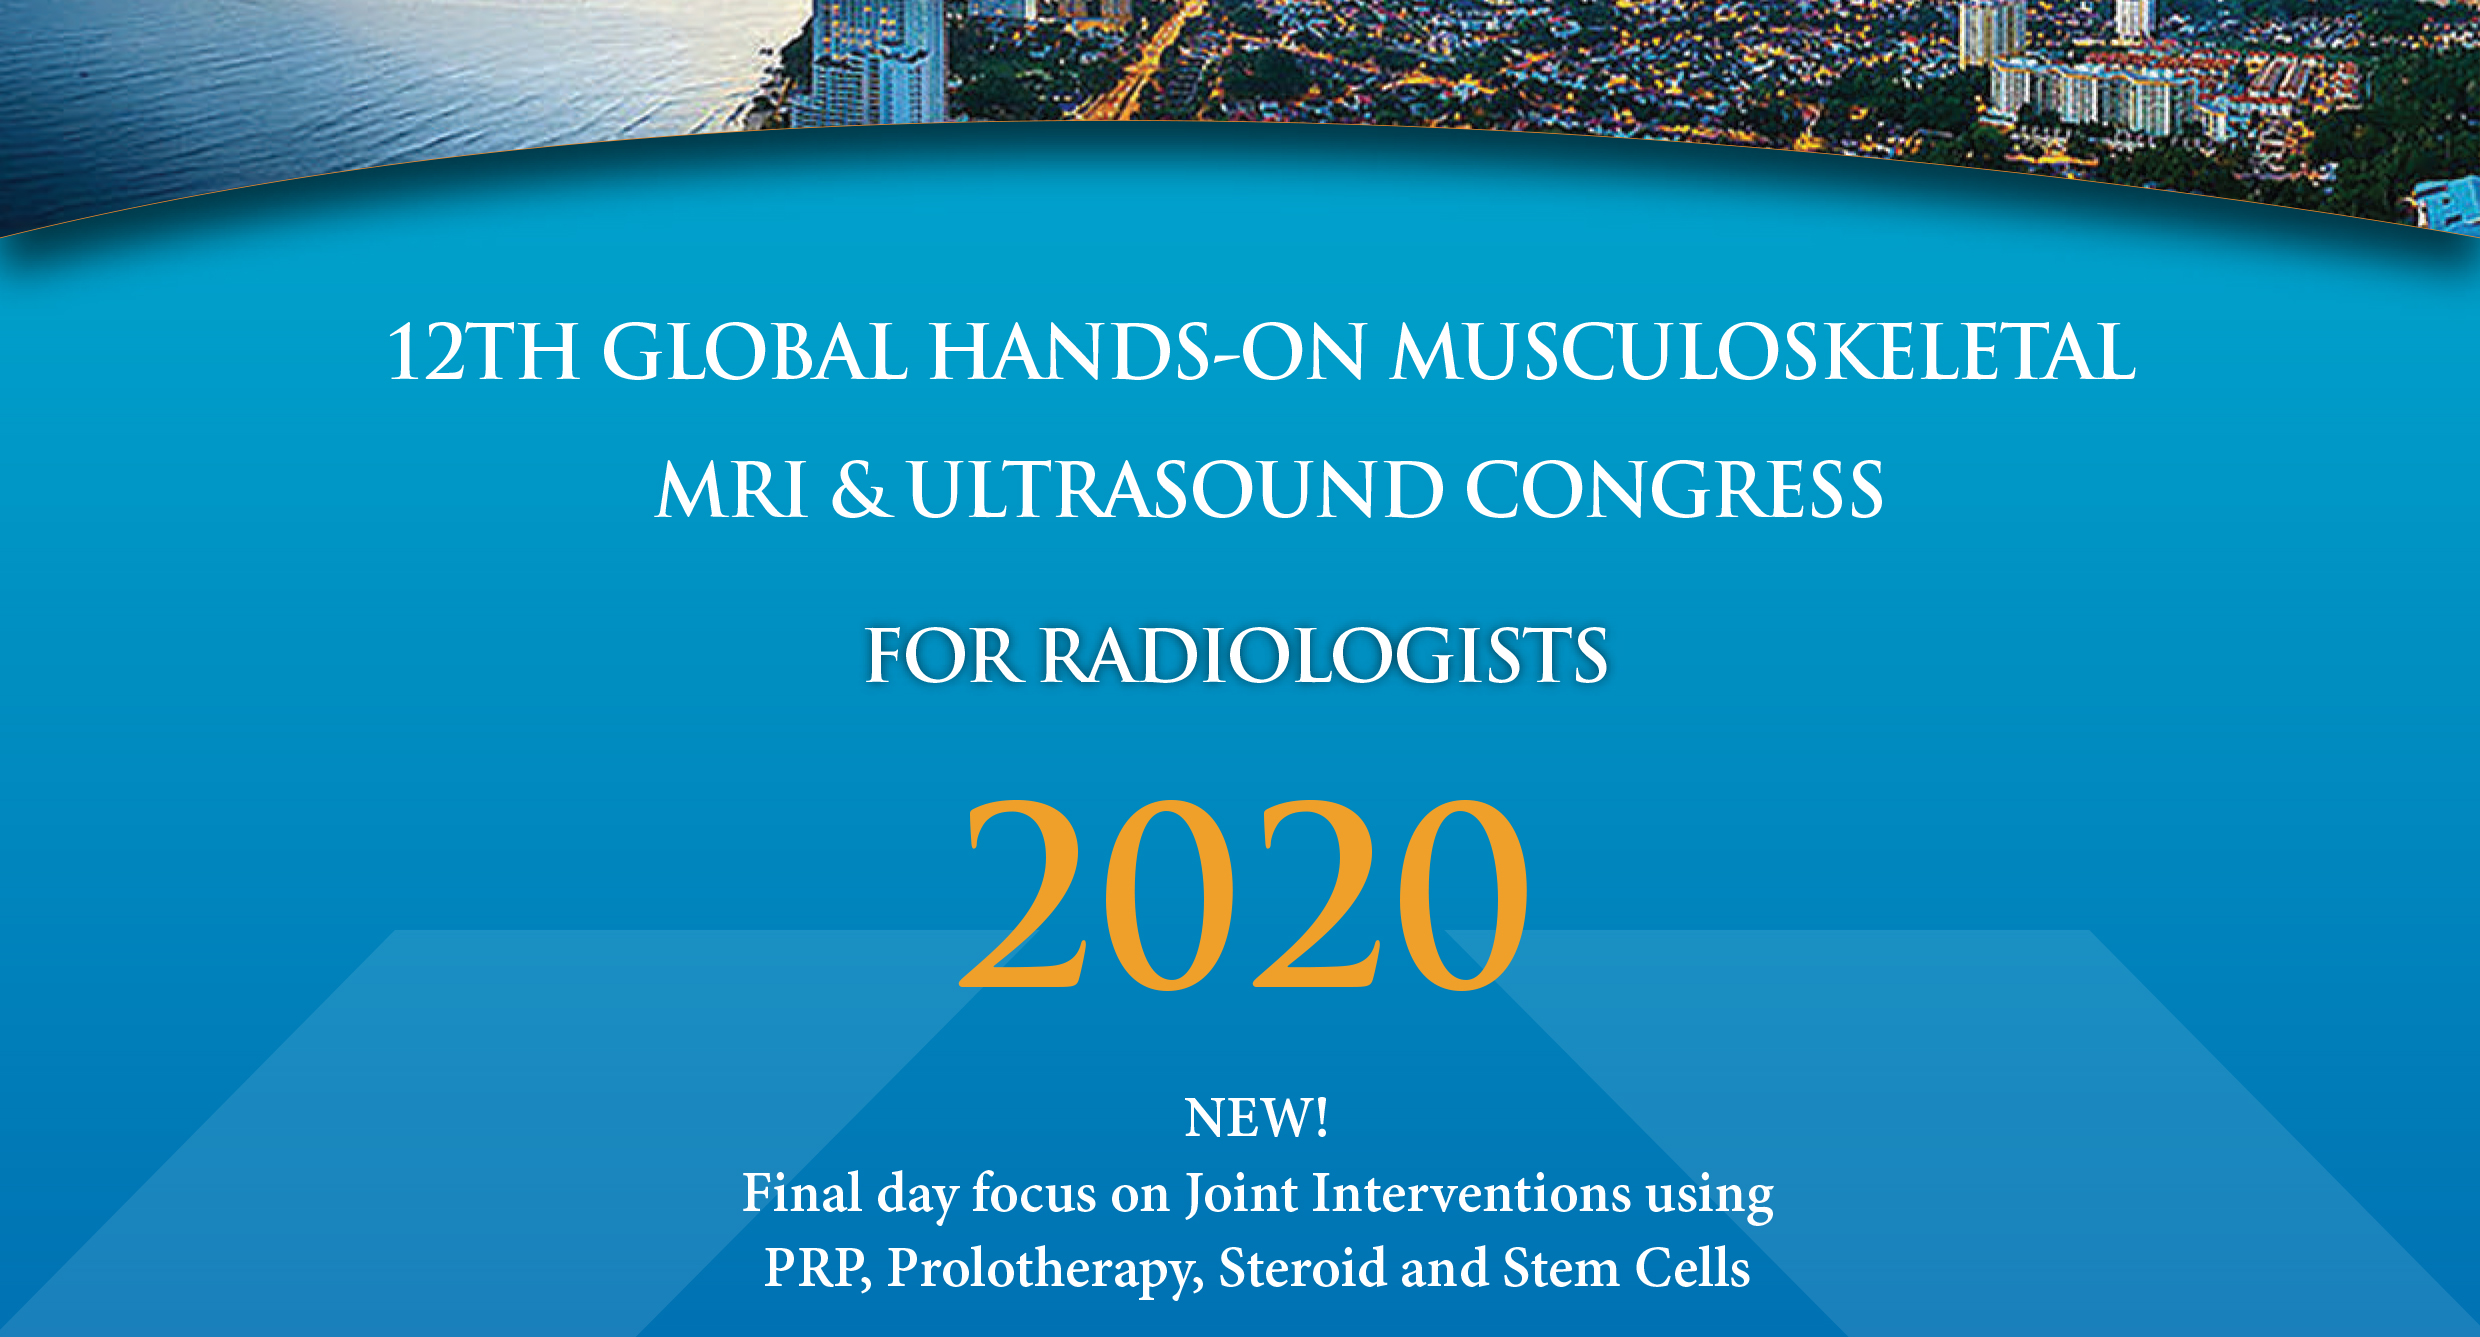 12TH GLOBAL HANDS-ON MUSCULOSKELETAL MRI & ULTRASOUND CONGRESS FOR RADIOLOGISTS 2020